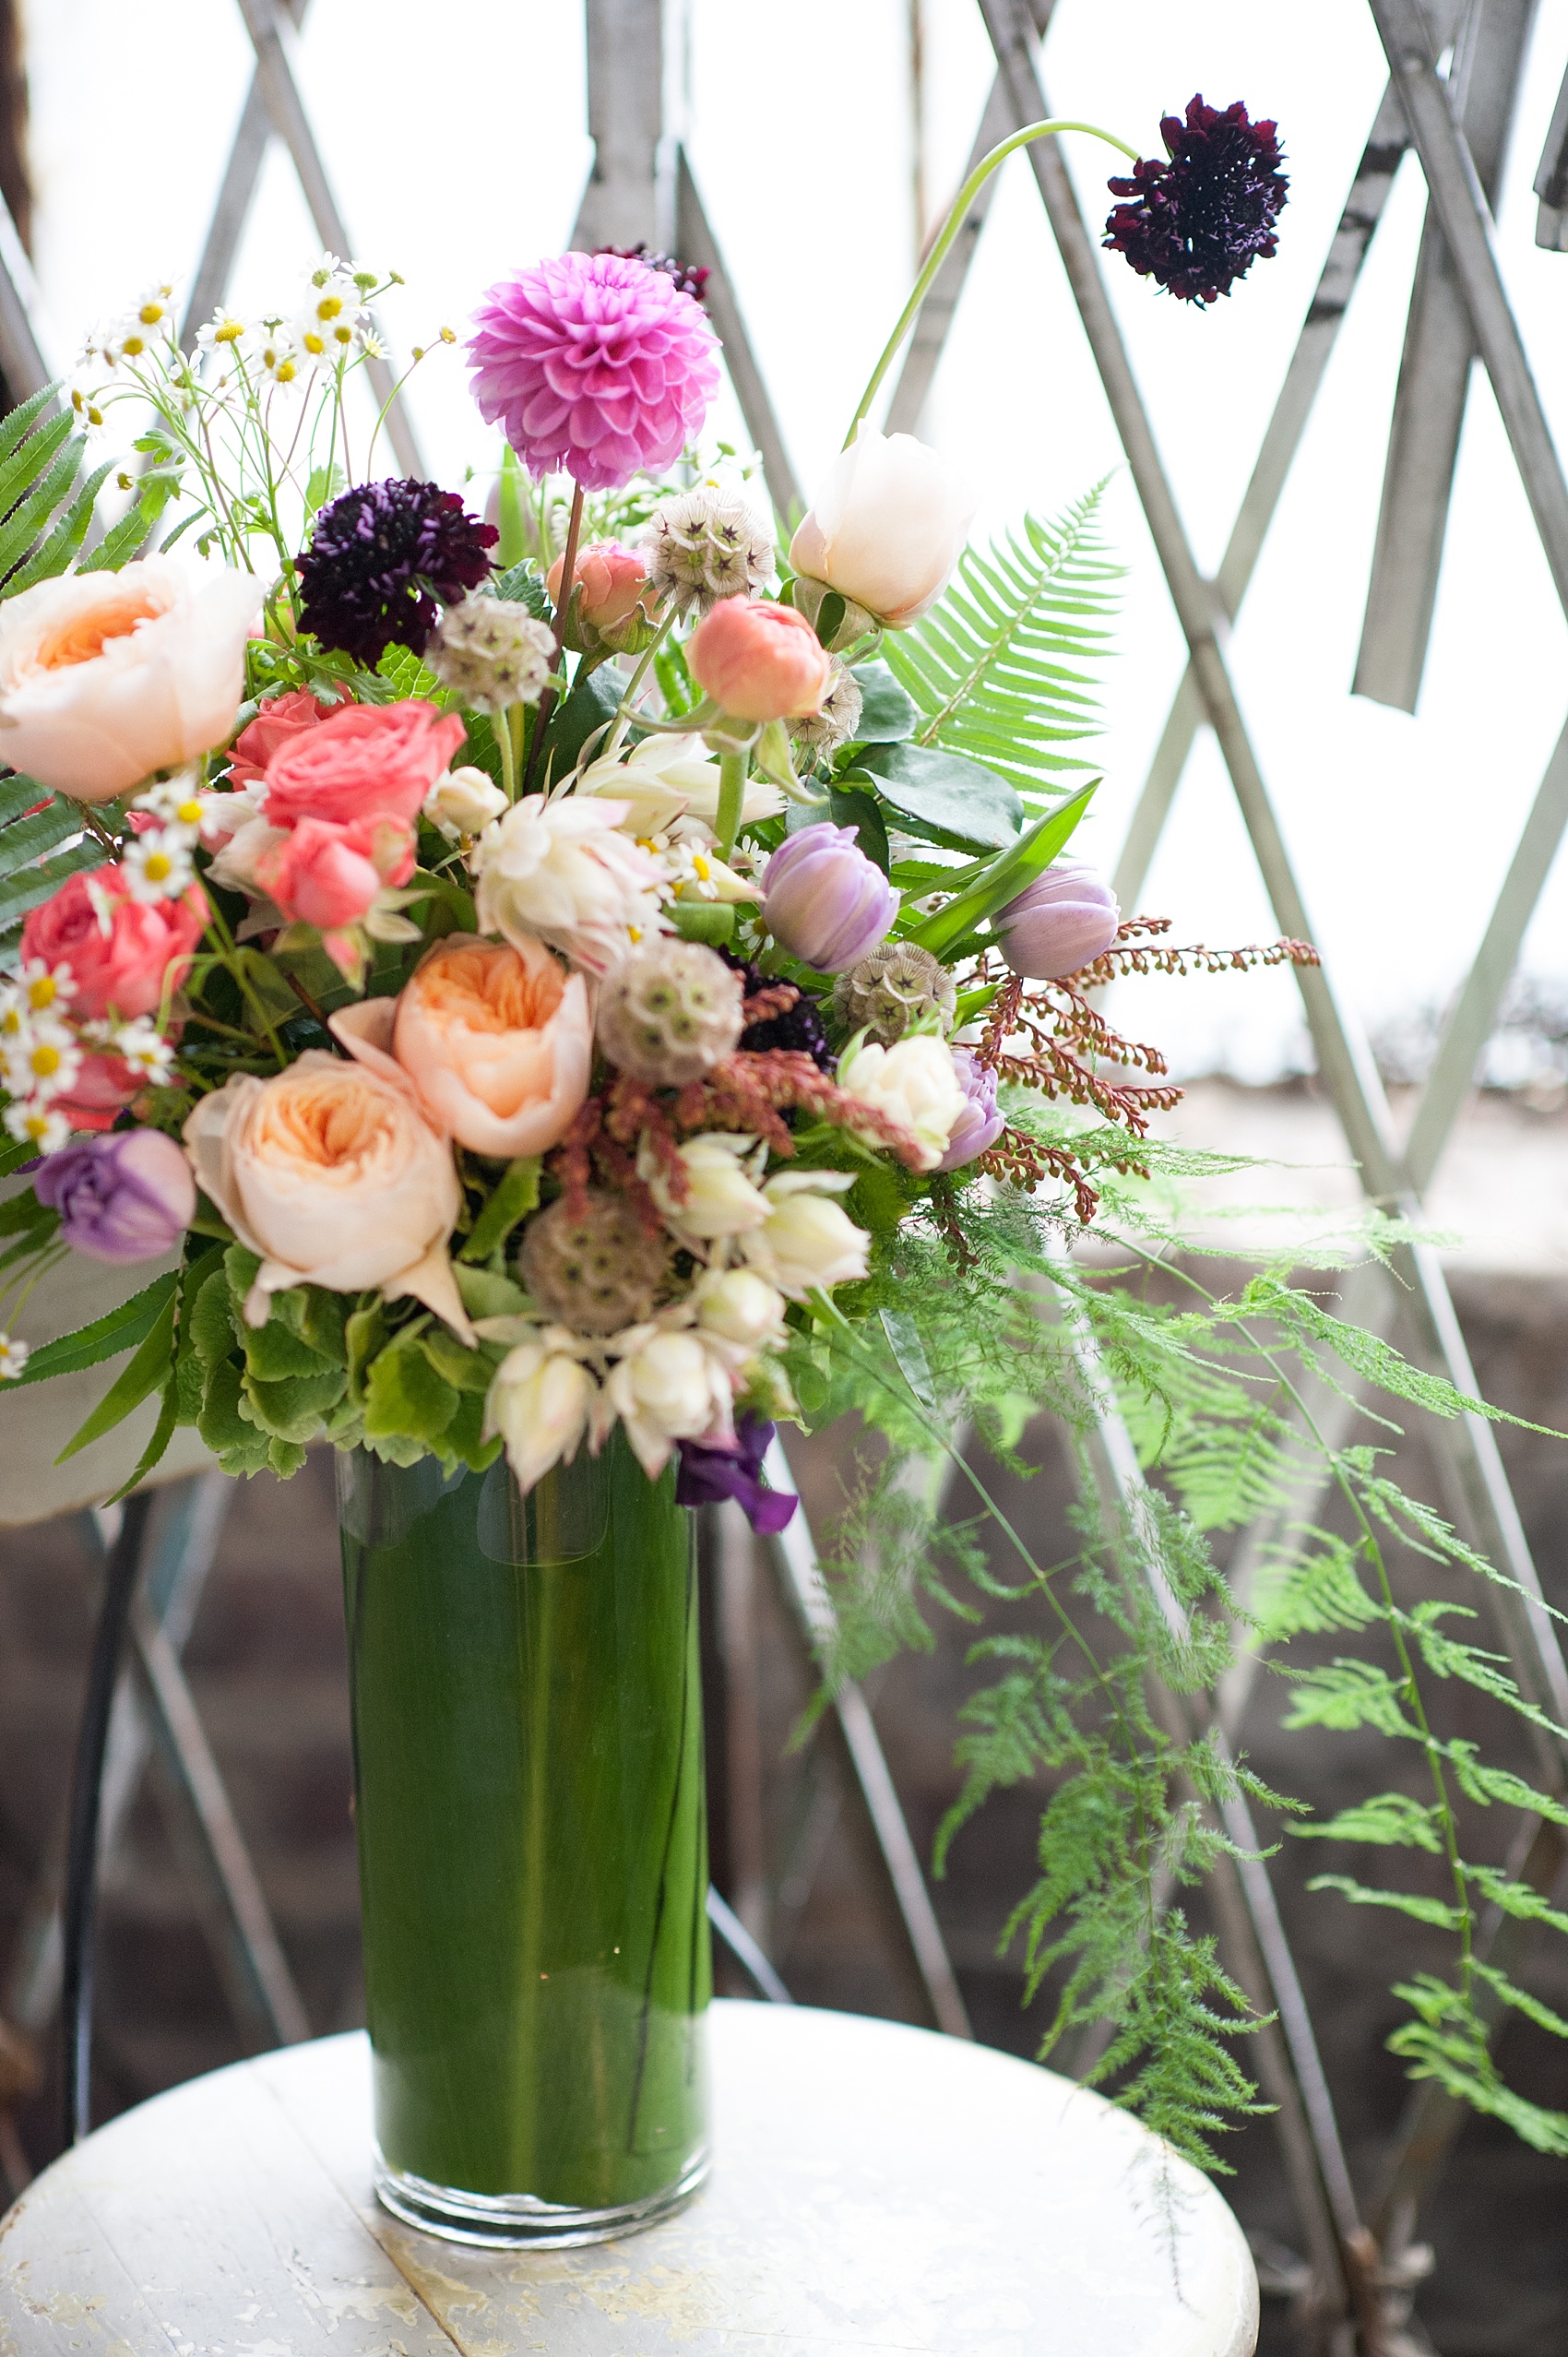 Bright summery wildflower bouquet by Sachi Rose Design florist. Photos by Mikkel Paige Photography.